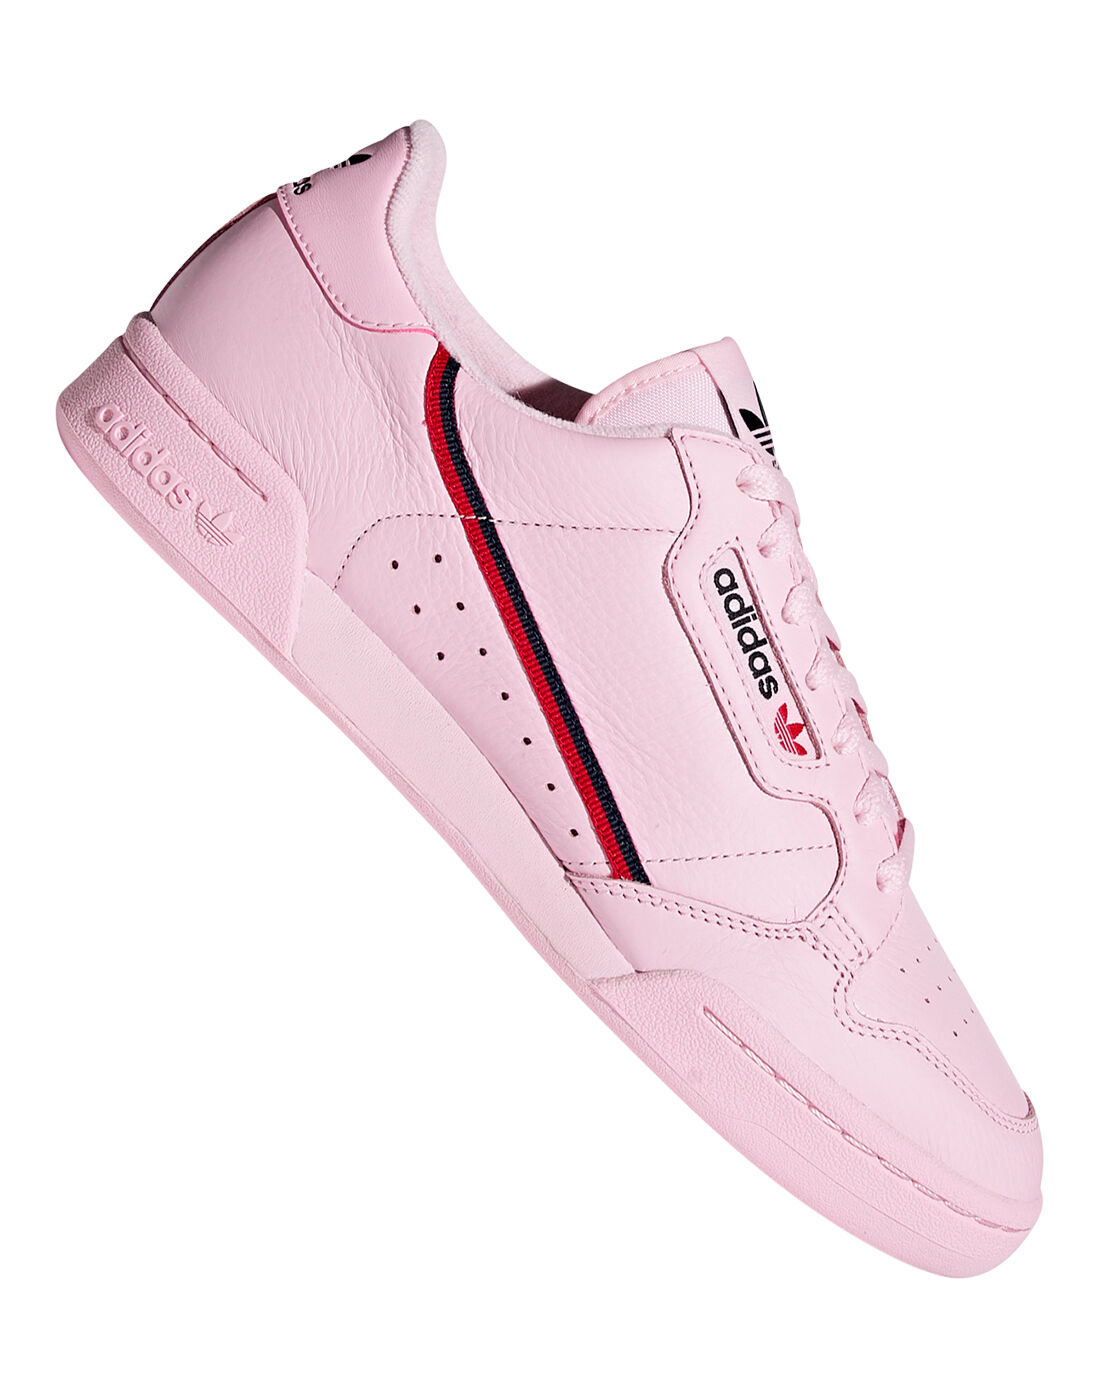 adidas pink trainers mens